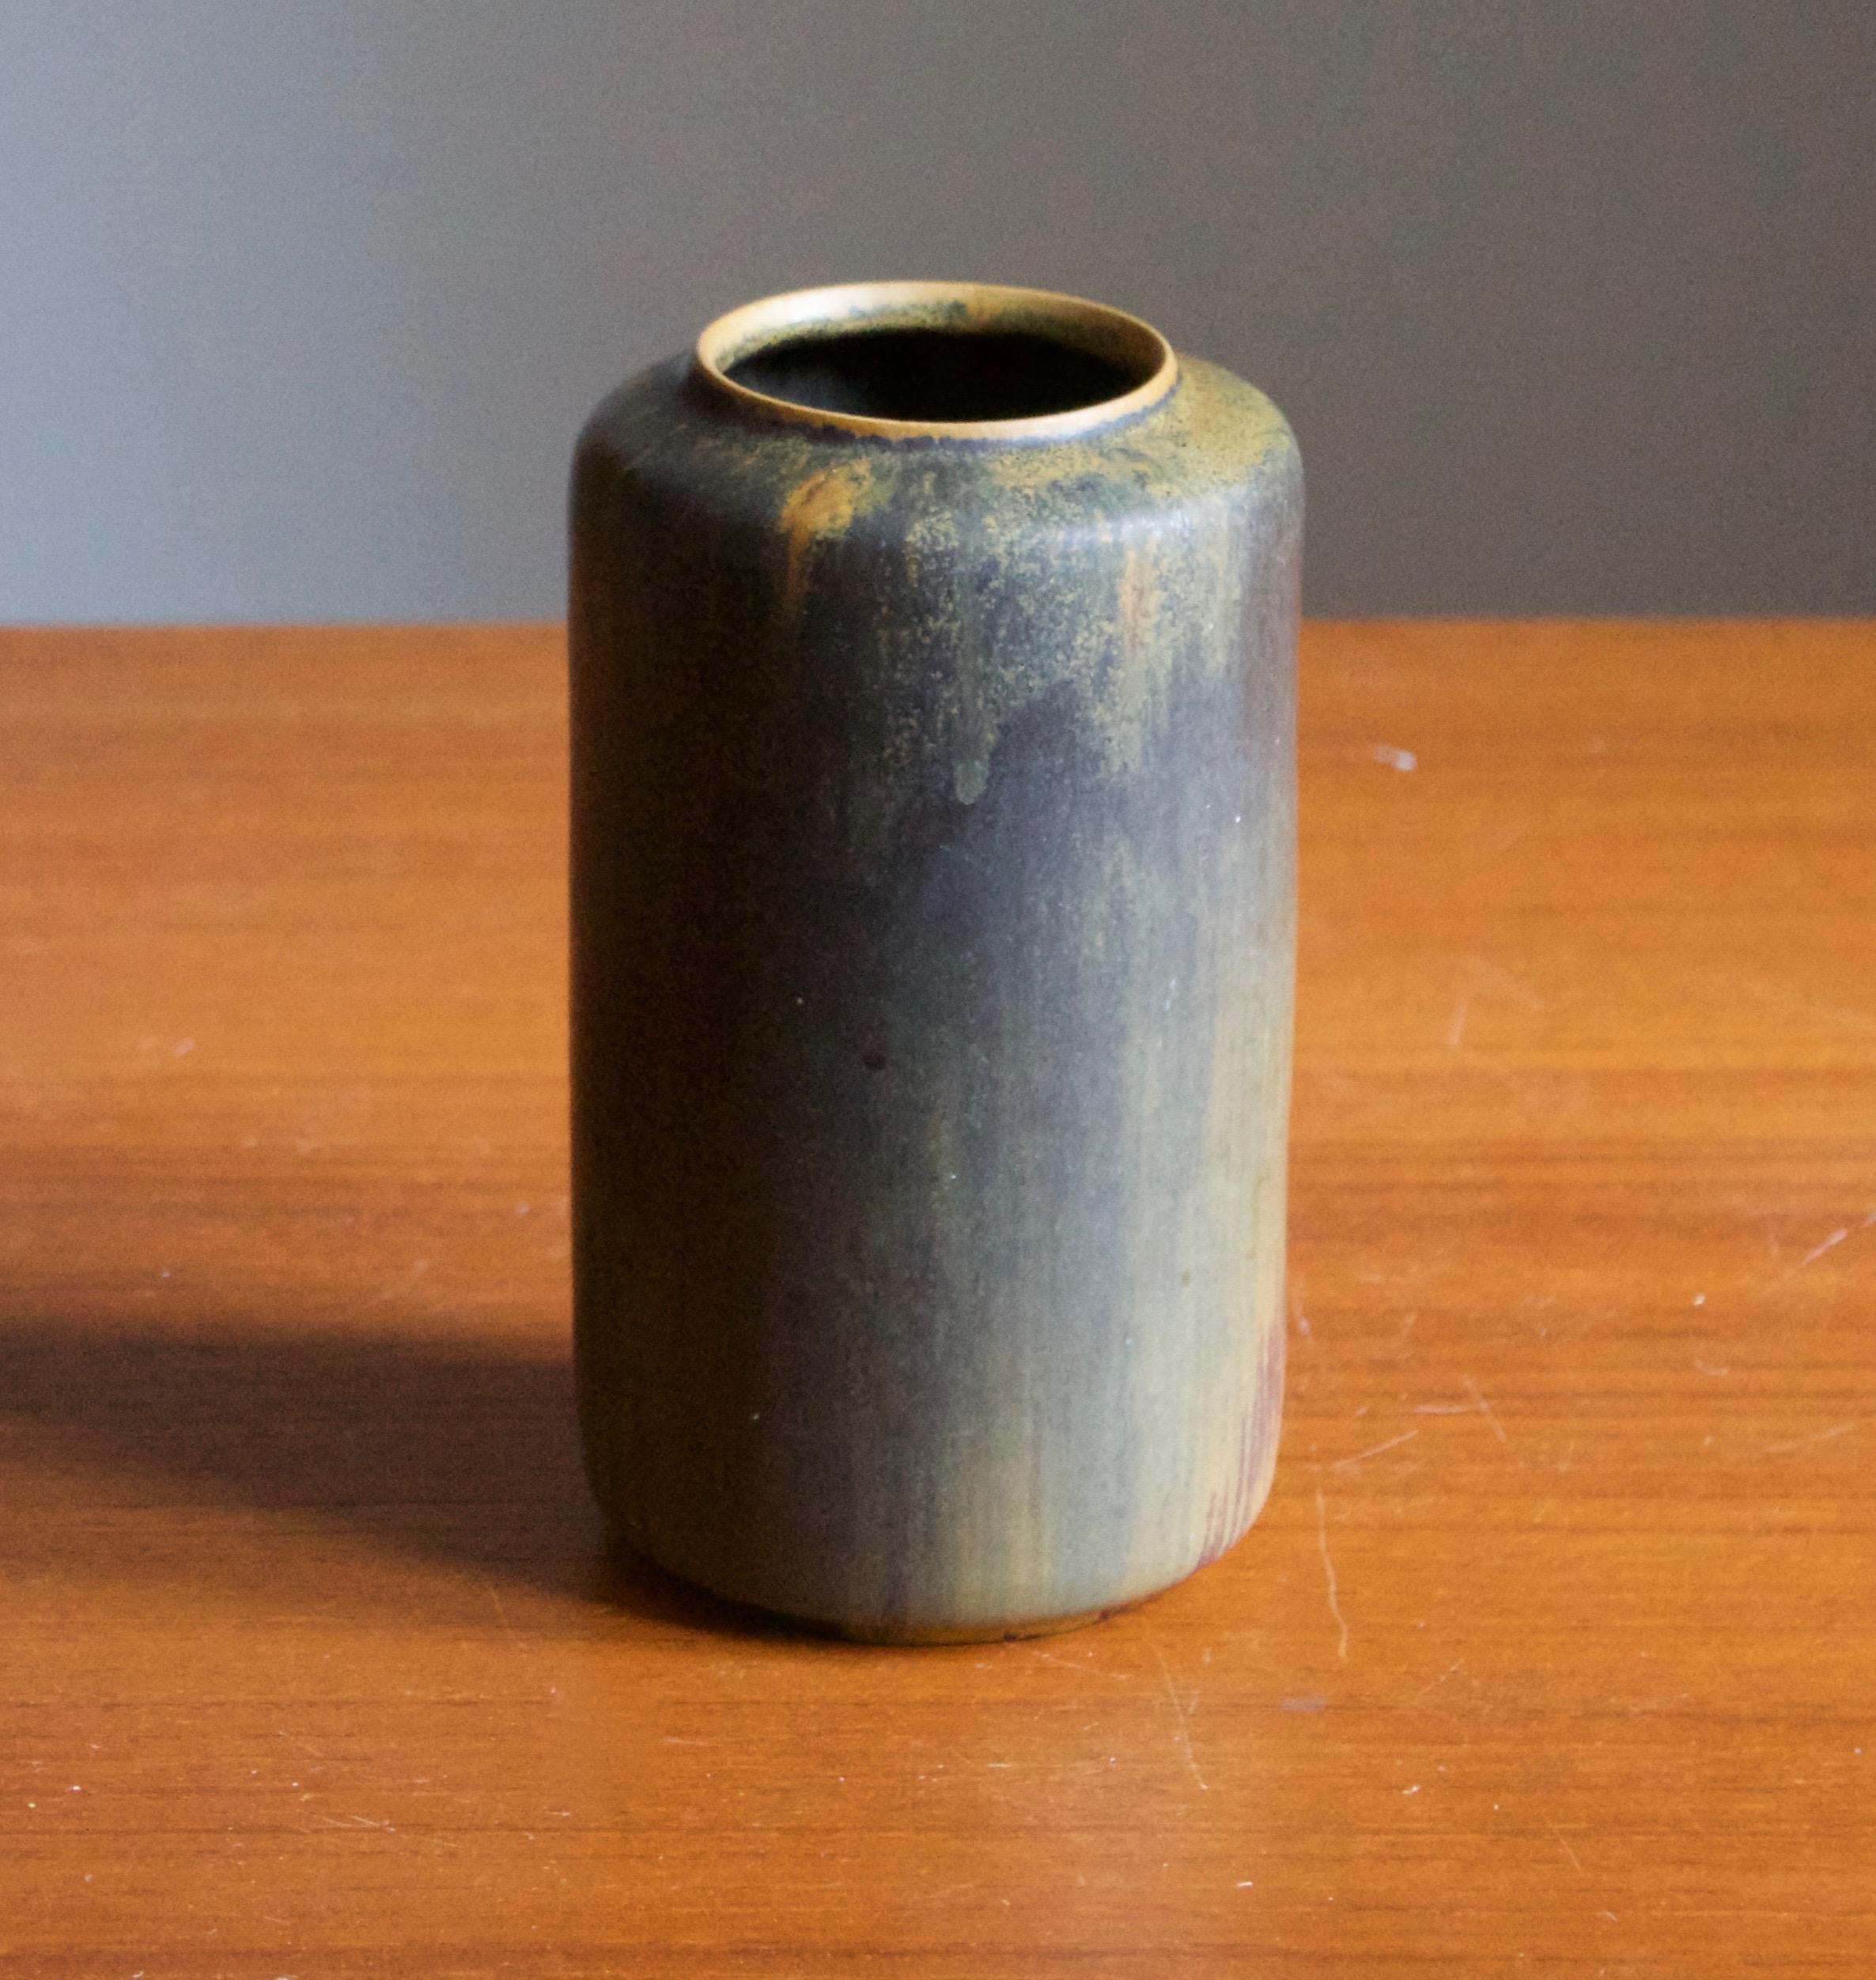 A vase produced by Ejvind Nielsen in his studio in Hvidovre, Denmark. Produced circa 1950s-1960s. Signed.